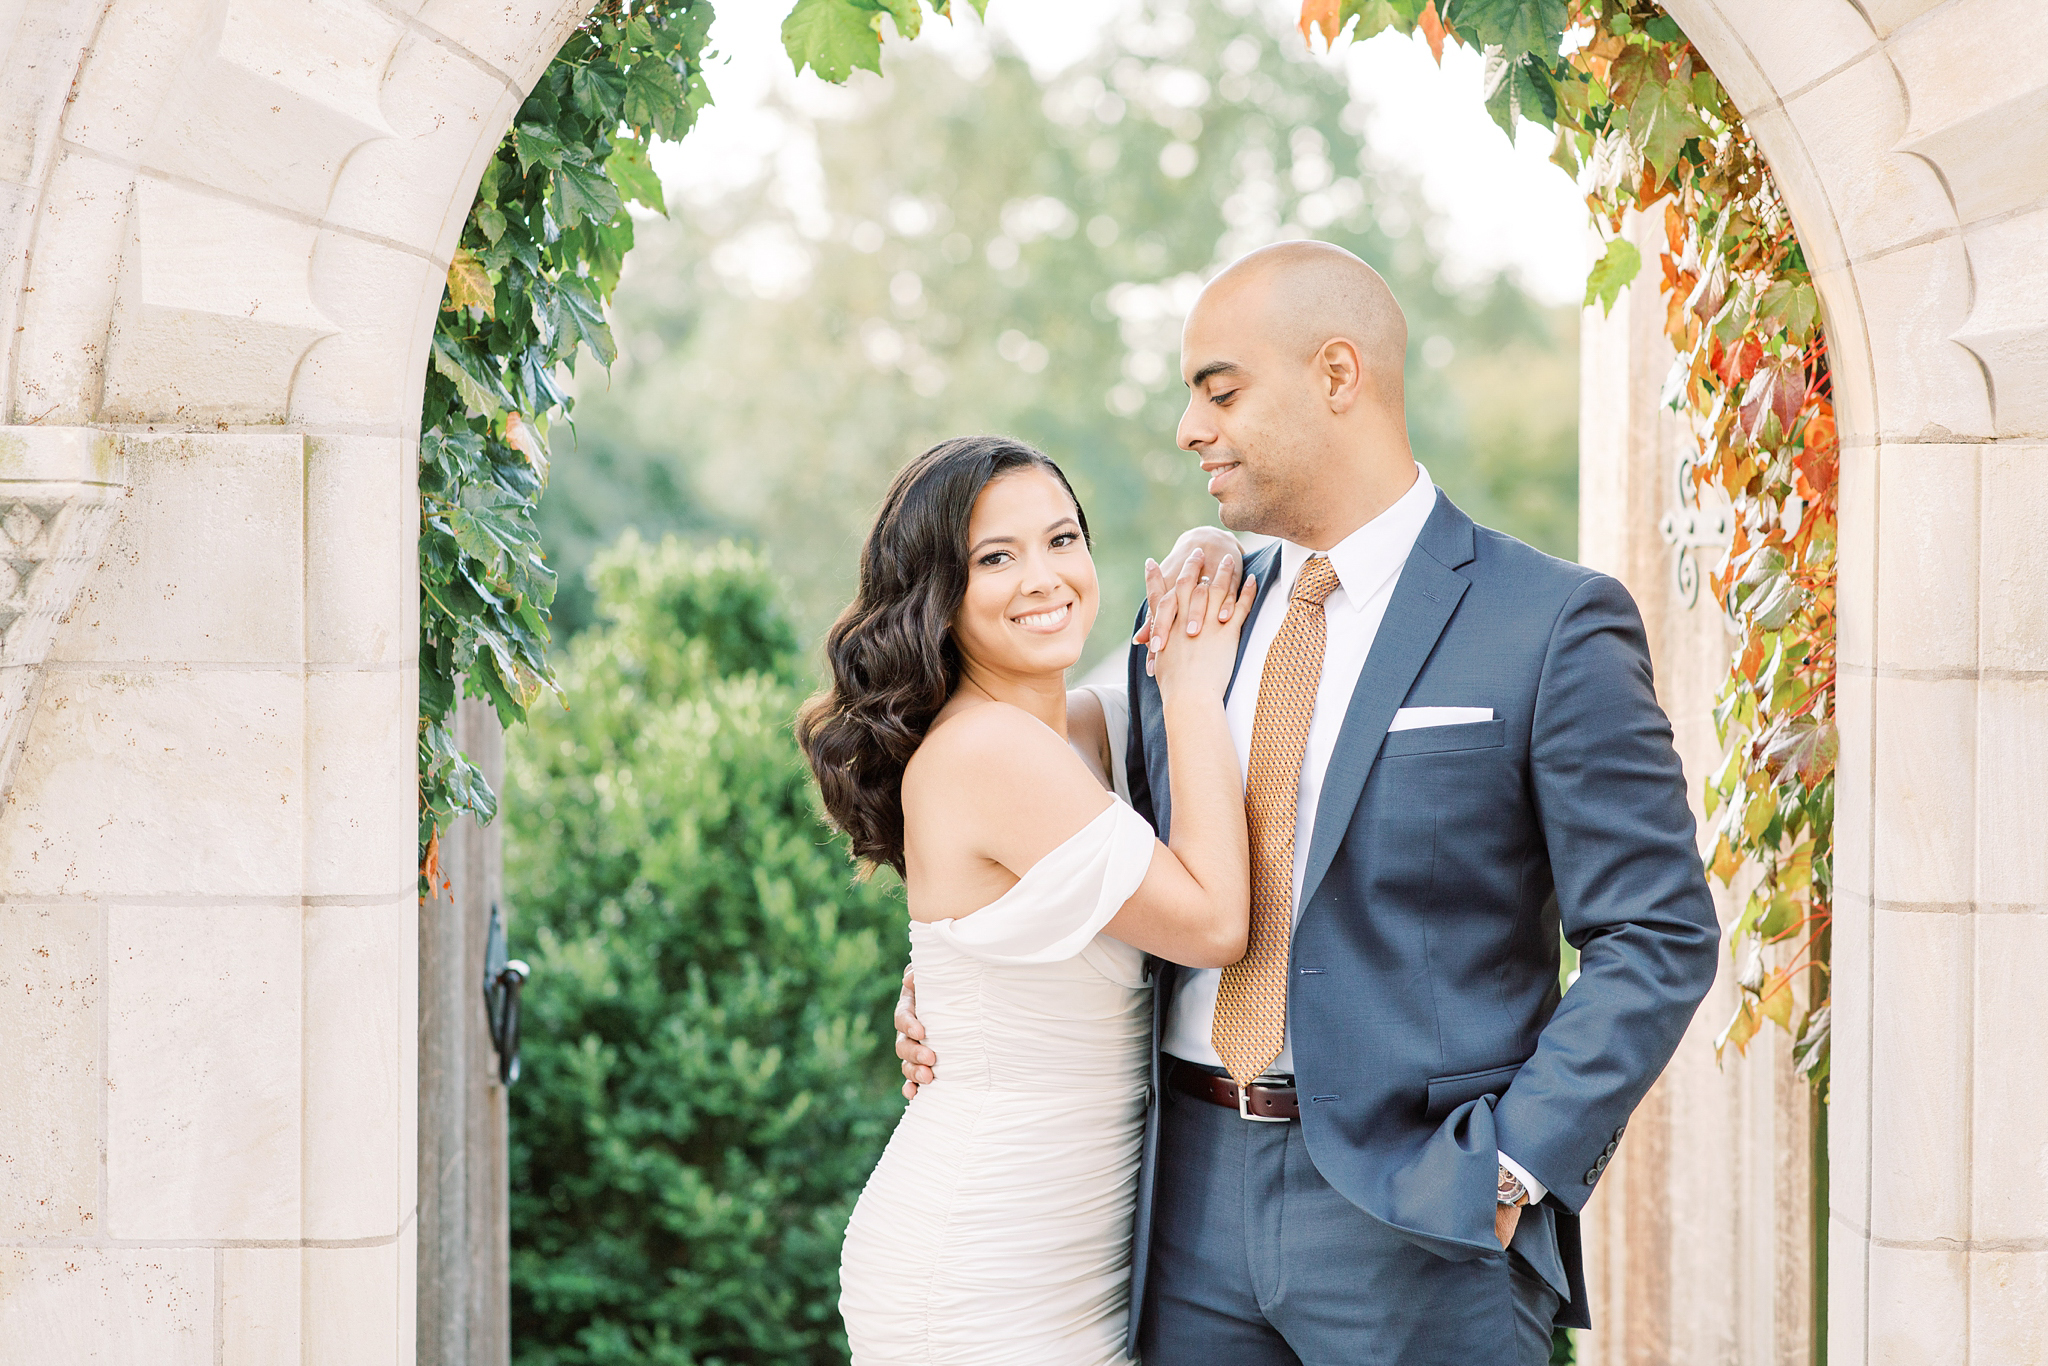 A romantic sunrise engagement session at National Cathedral in Washington, DC.